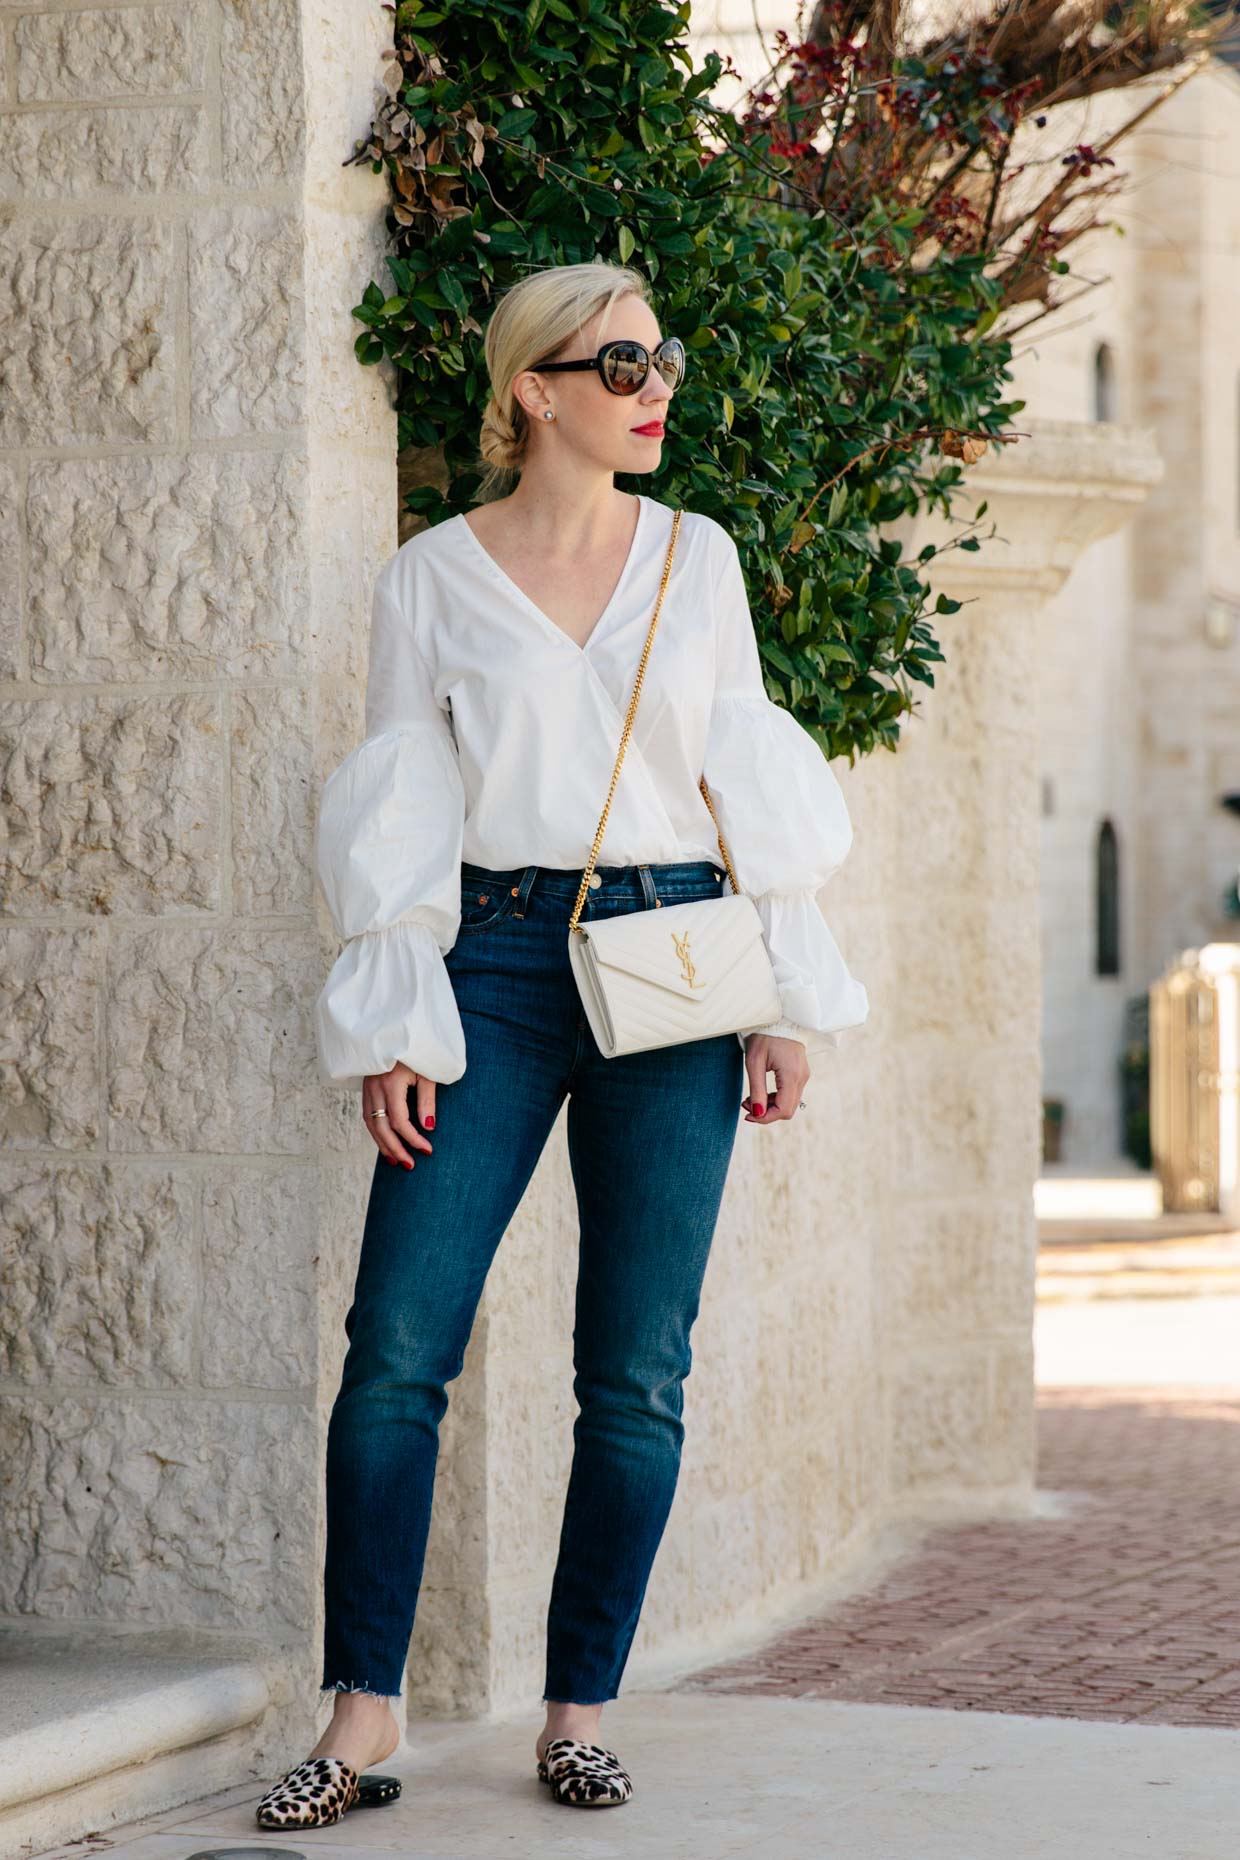 https://www.meagansmoda.com/wp-content/uploads/2018/03/Meagan-Brandon-fashion-blogger-of-Meagans-Moda-wears-white-lantern-sleeve-blouse-with-Levis-Wedgie-high-waist-jeans-and-leopard-mules-spring-outfit.jpg